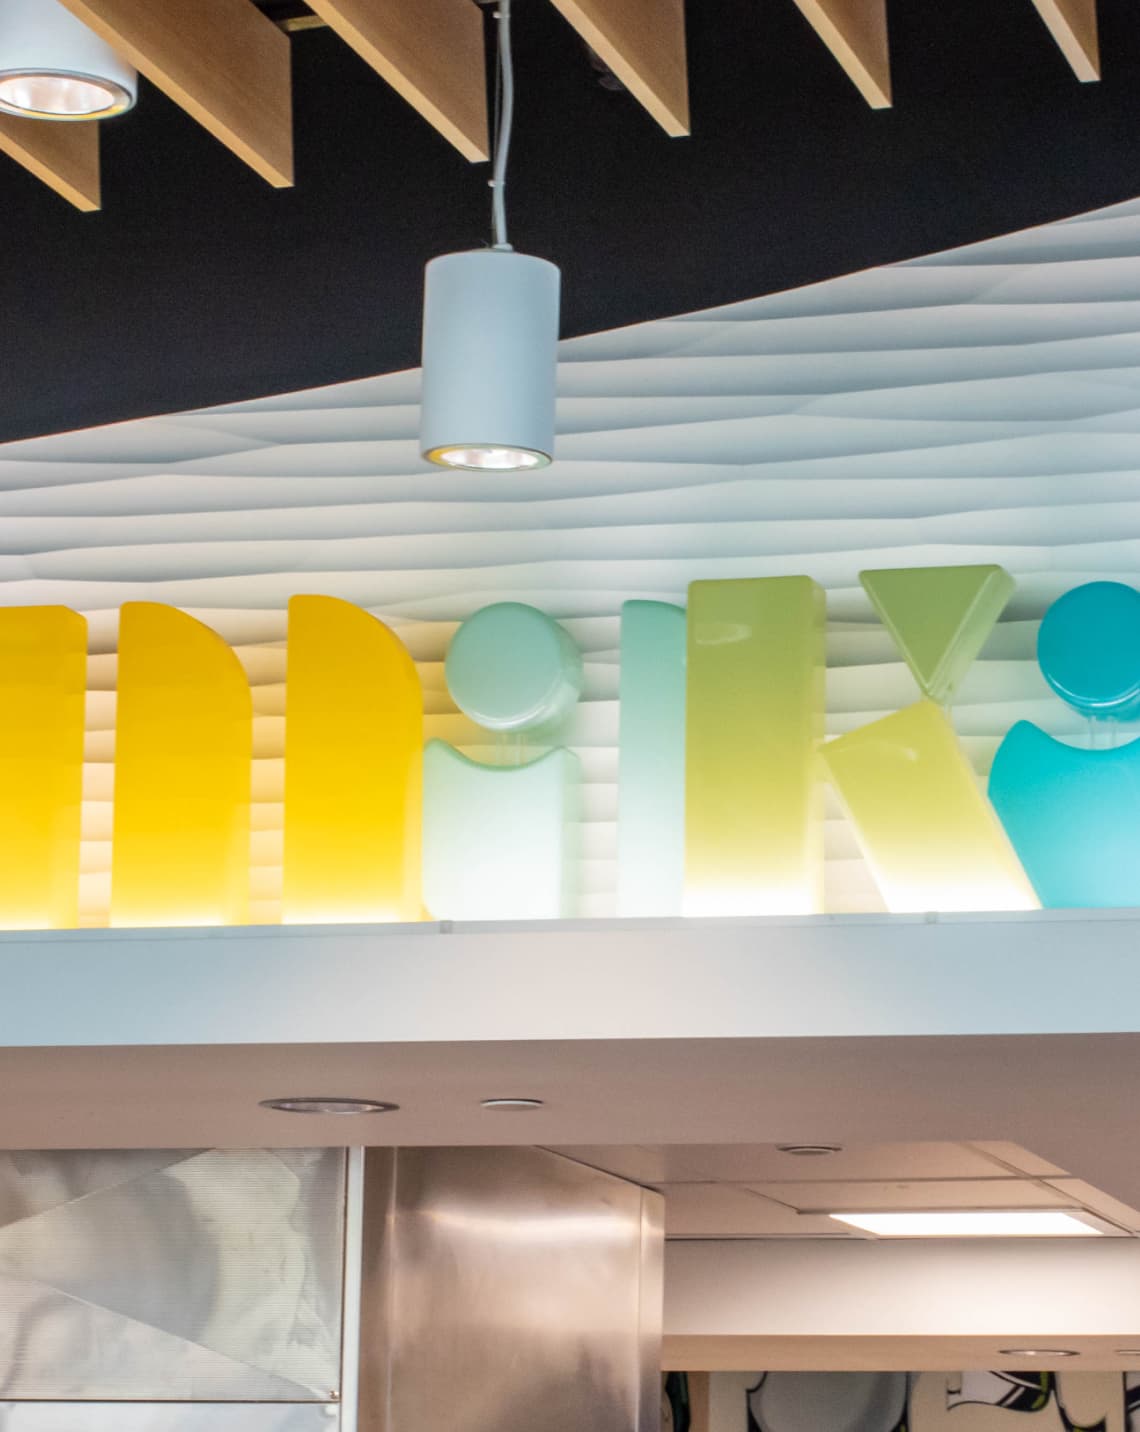 Close up of colorful resin sign identity for "Makai" in UC San Diego Sixth College's dining hall by RSM Design in San Diego, California.